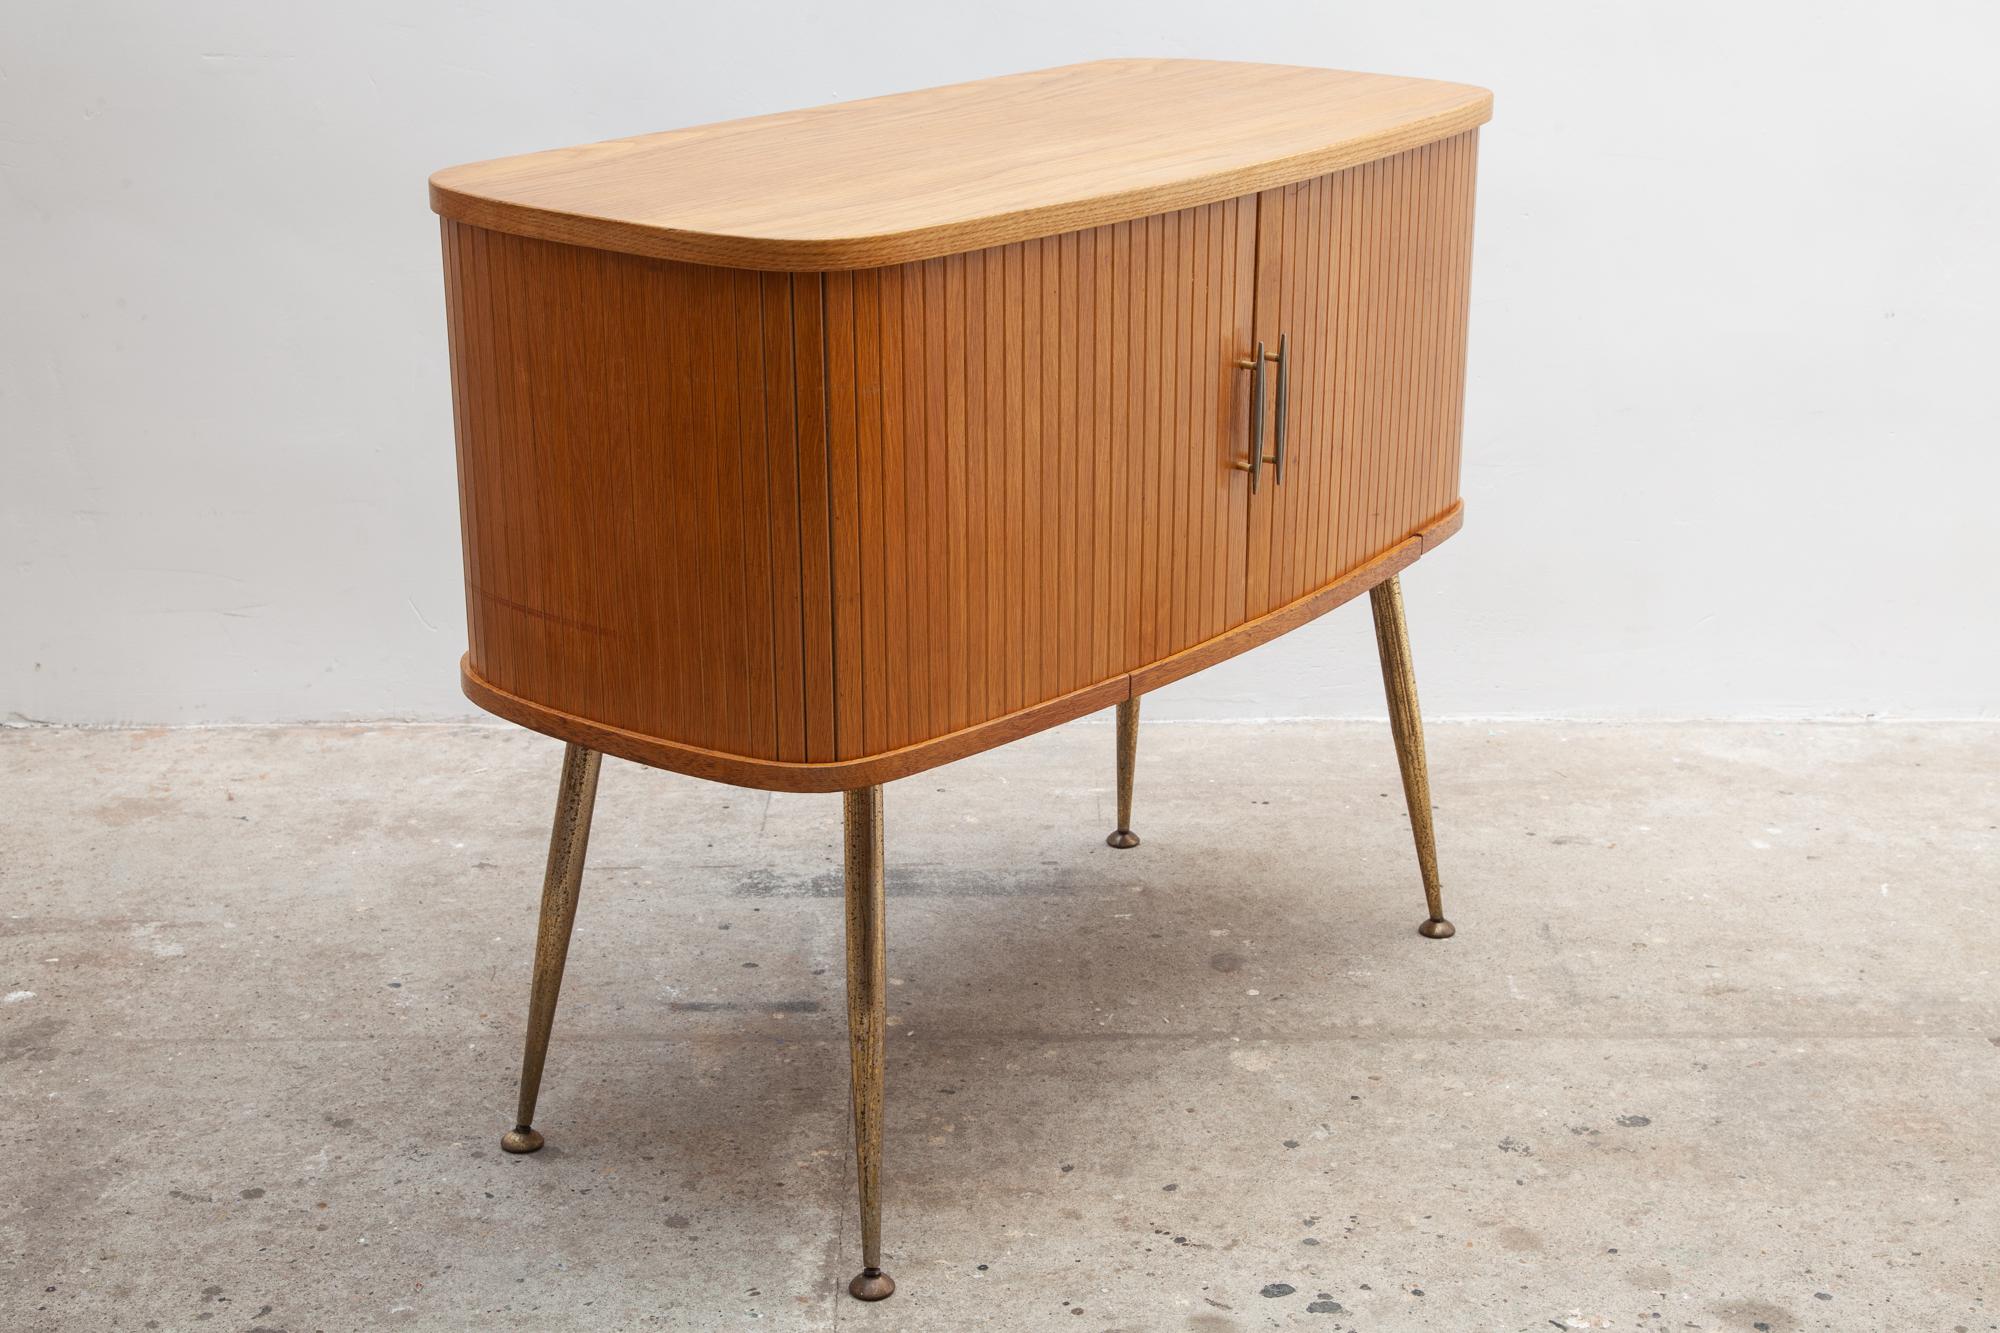 Hand-Crafted Small Oval Sideboard, Desk WK Möbel, Germany, 1950s